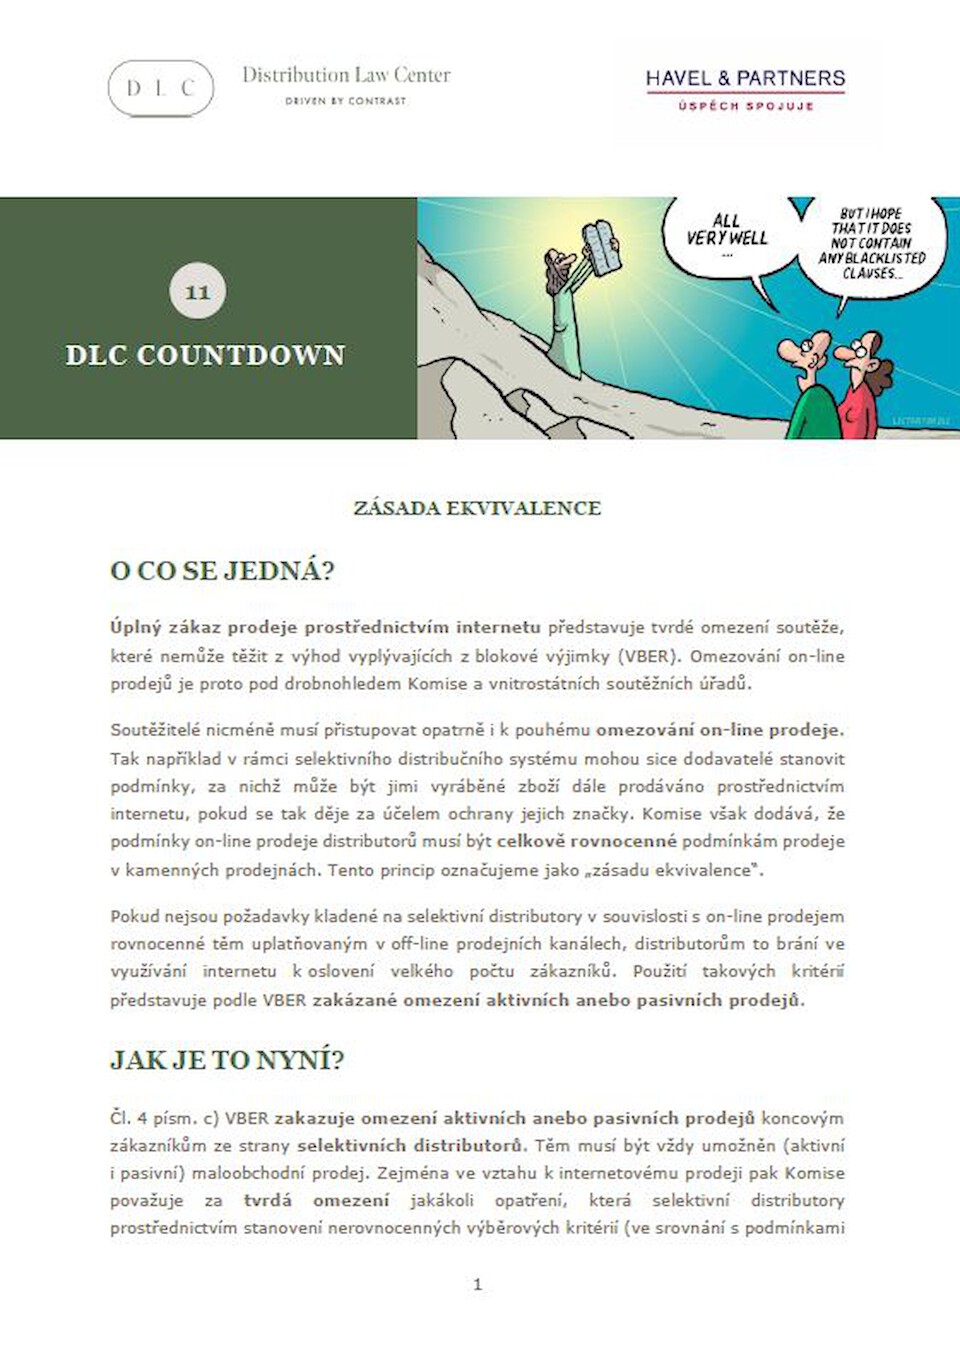 Distribution Law Center Countdown XI - Hardcore restrictions (Equivalence)